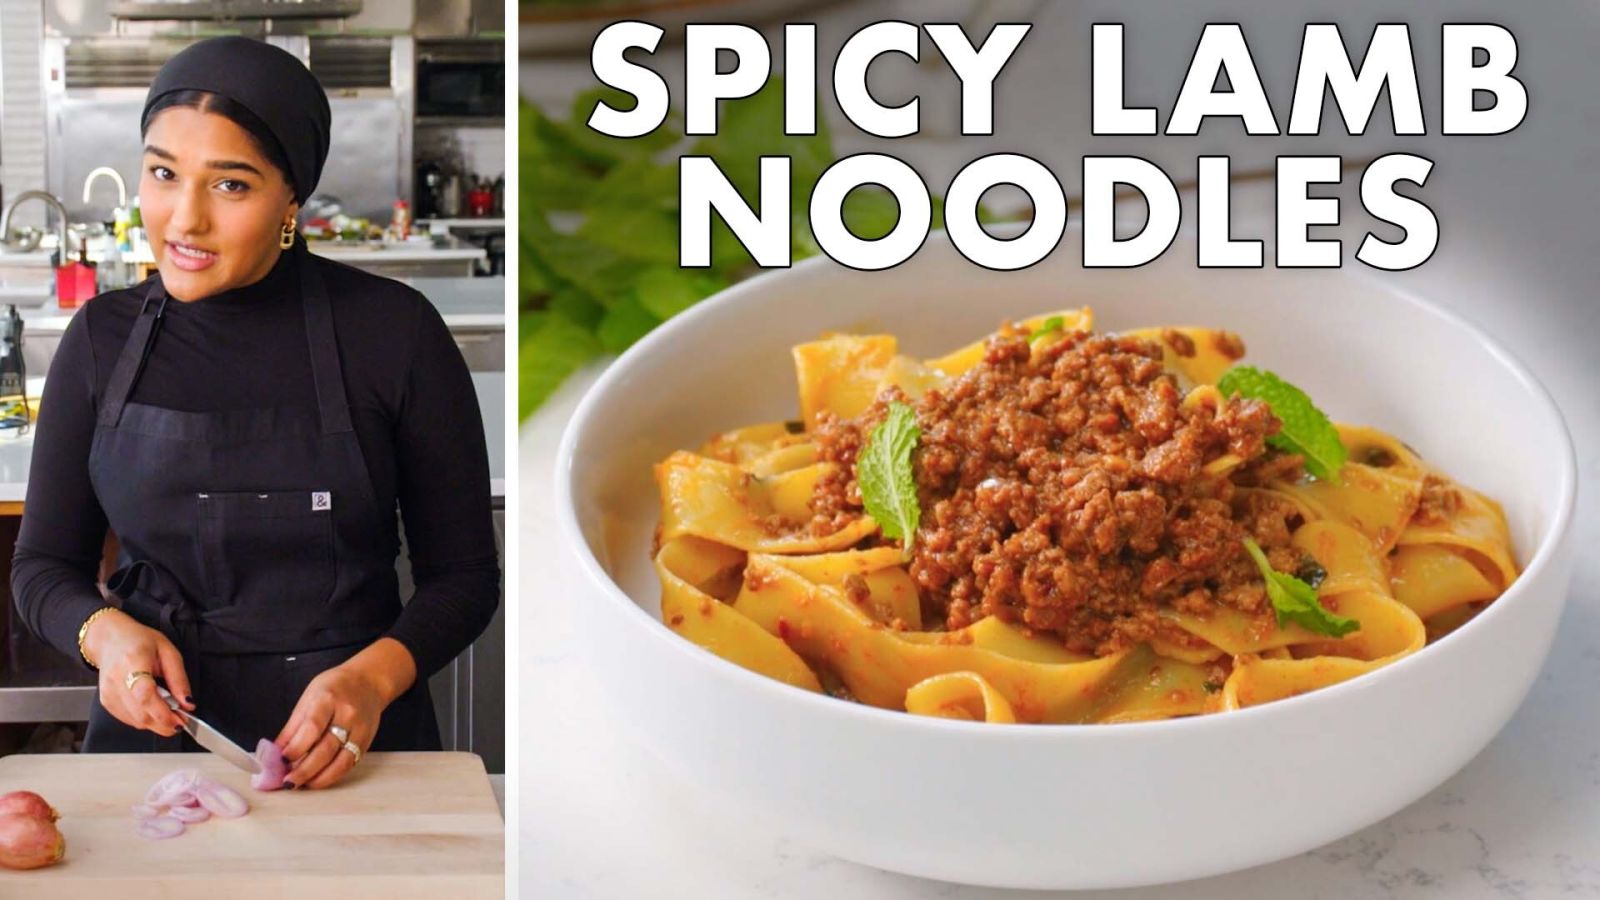 Slicked & Spicy Lamb Noodles, Perfect For A Weeknight Dinner